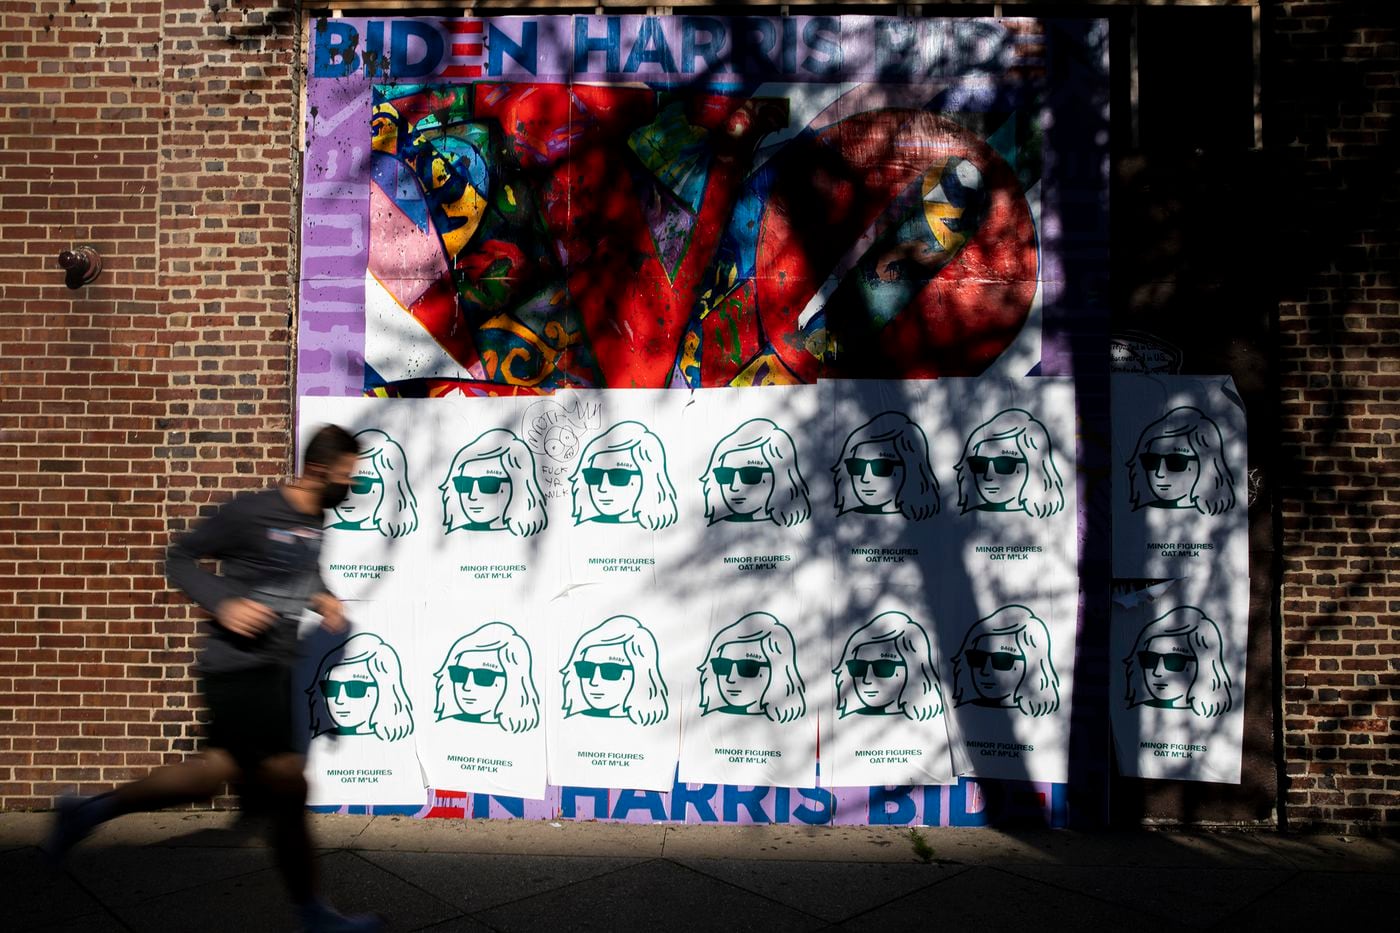 A runner passes by street art covered by plastered advertisement by a London oat milk company along South Broad Street.